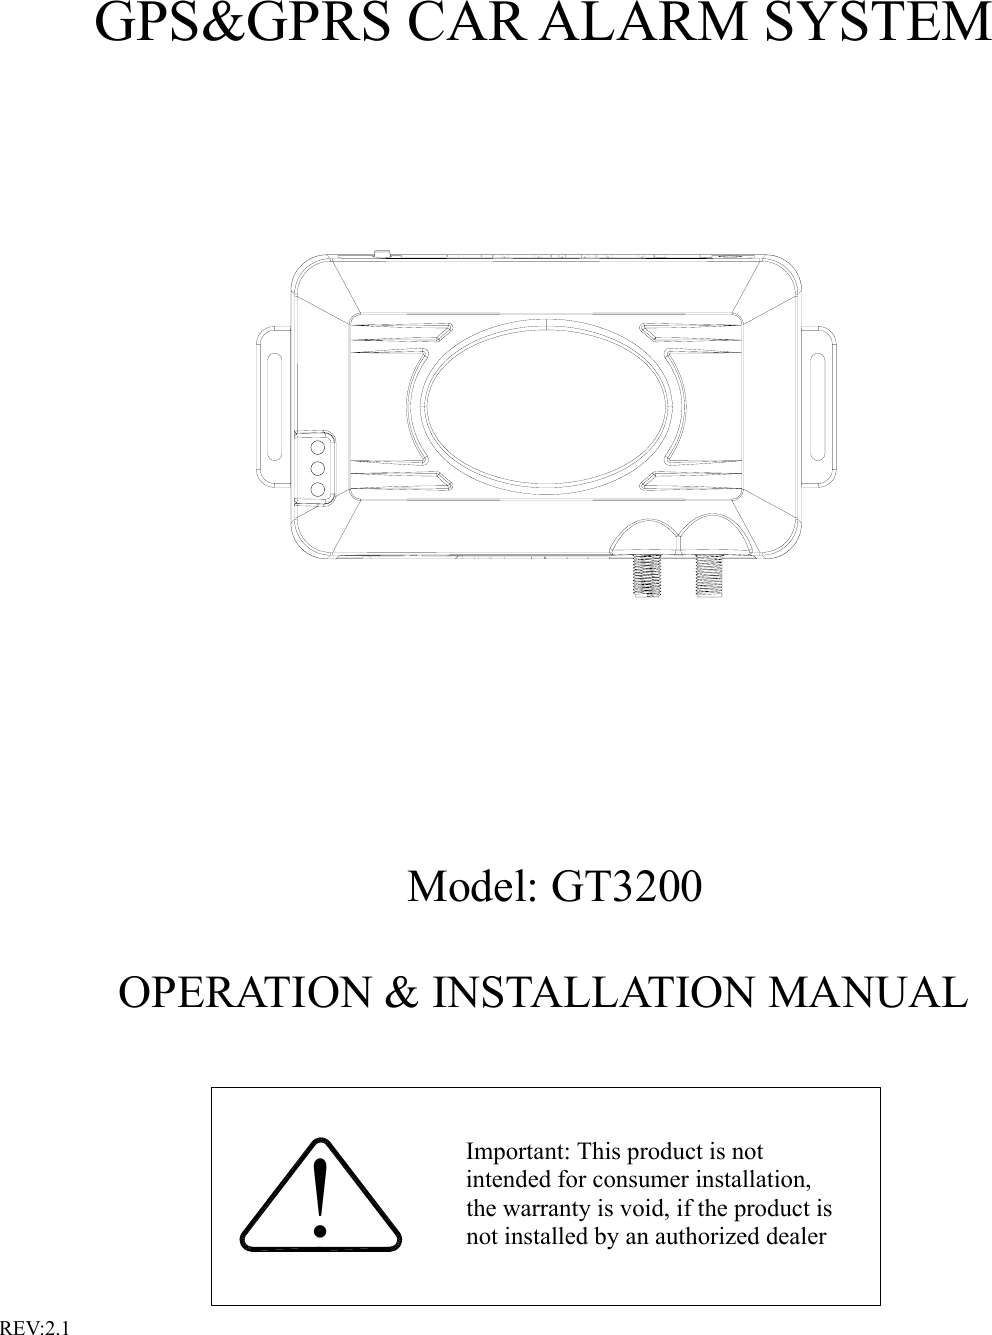      GPS&amp;GPRS CAR ALARM SYSTEM           Model: GT3200 OPERATION &amp; INSTALLATION MANUAL  Important: This product is not intended for consumer installation, the warranty is void, if the product is not installed by an authorized dealer! REV:2.1 